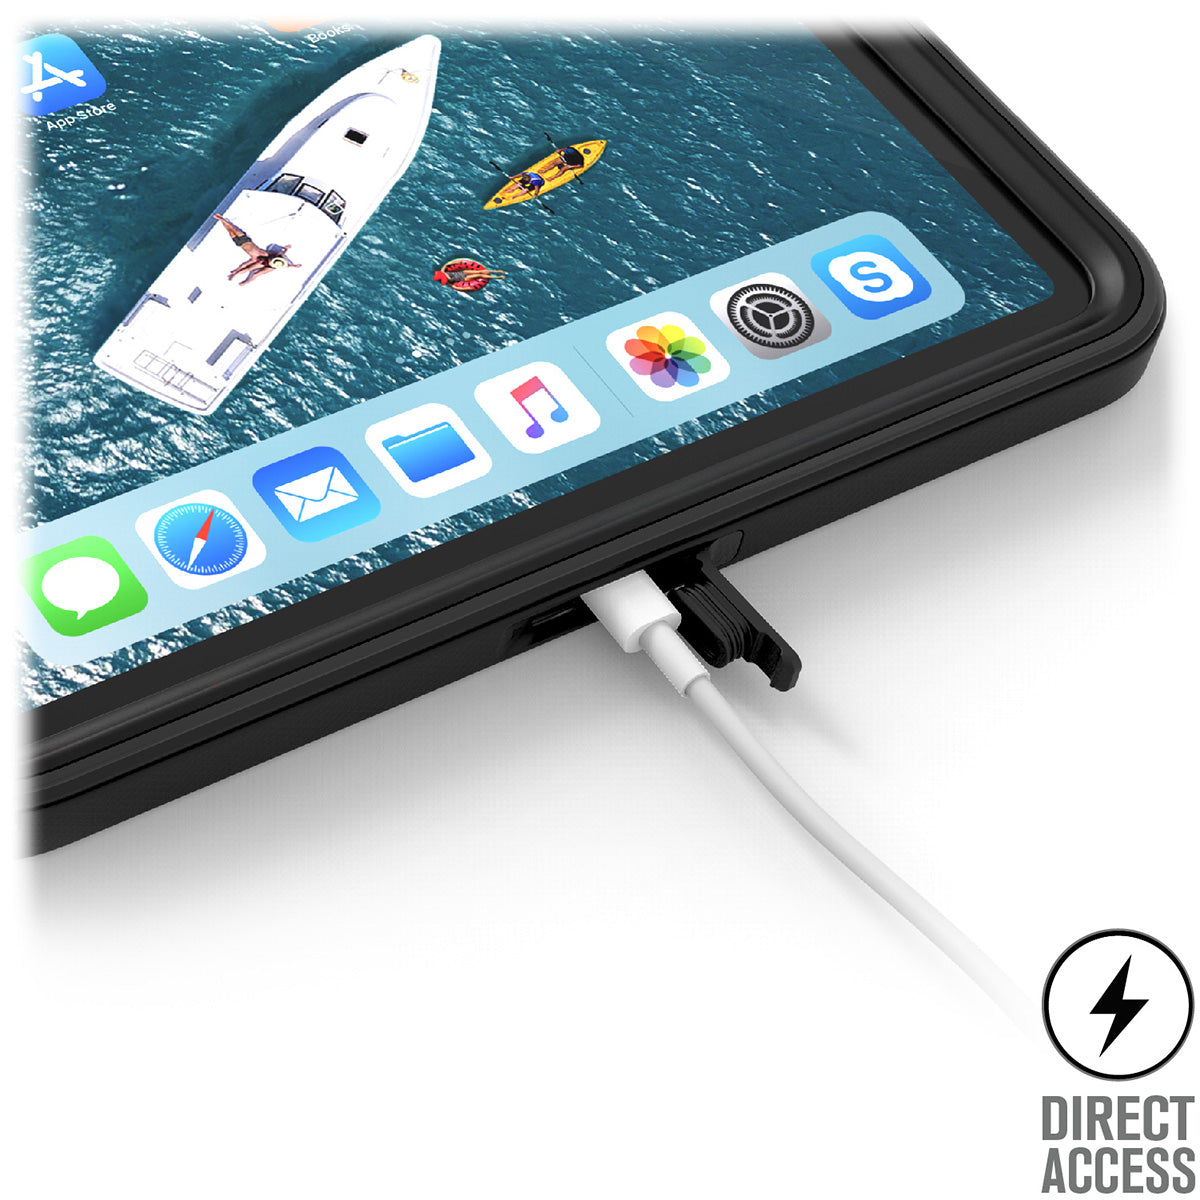 Catalyst waterproof case for ipad pro gen 3 12.9in black charging port Text reads direct access 